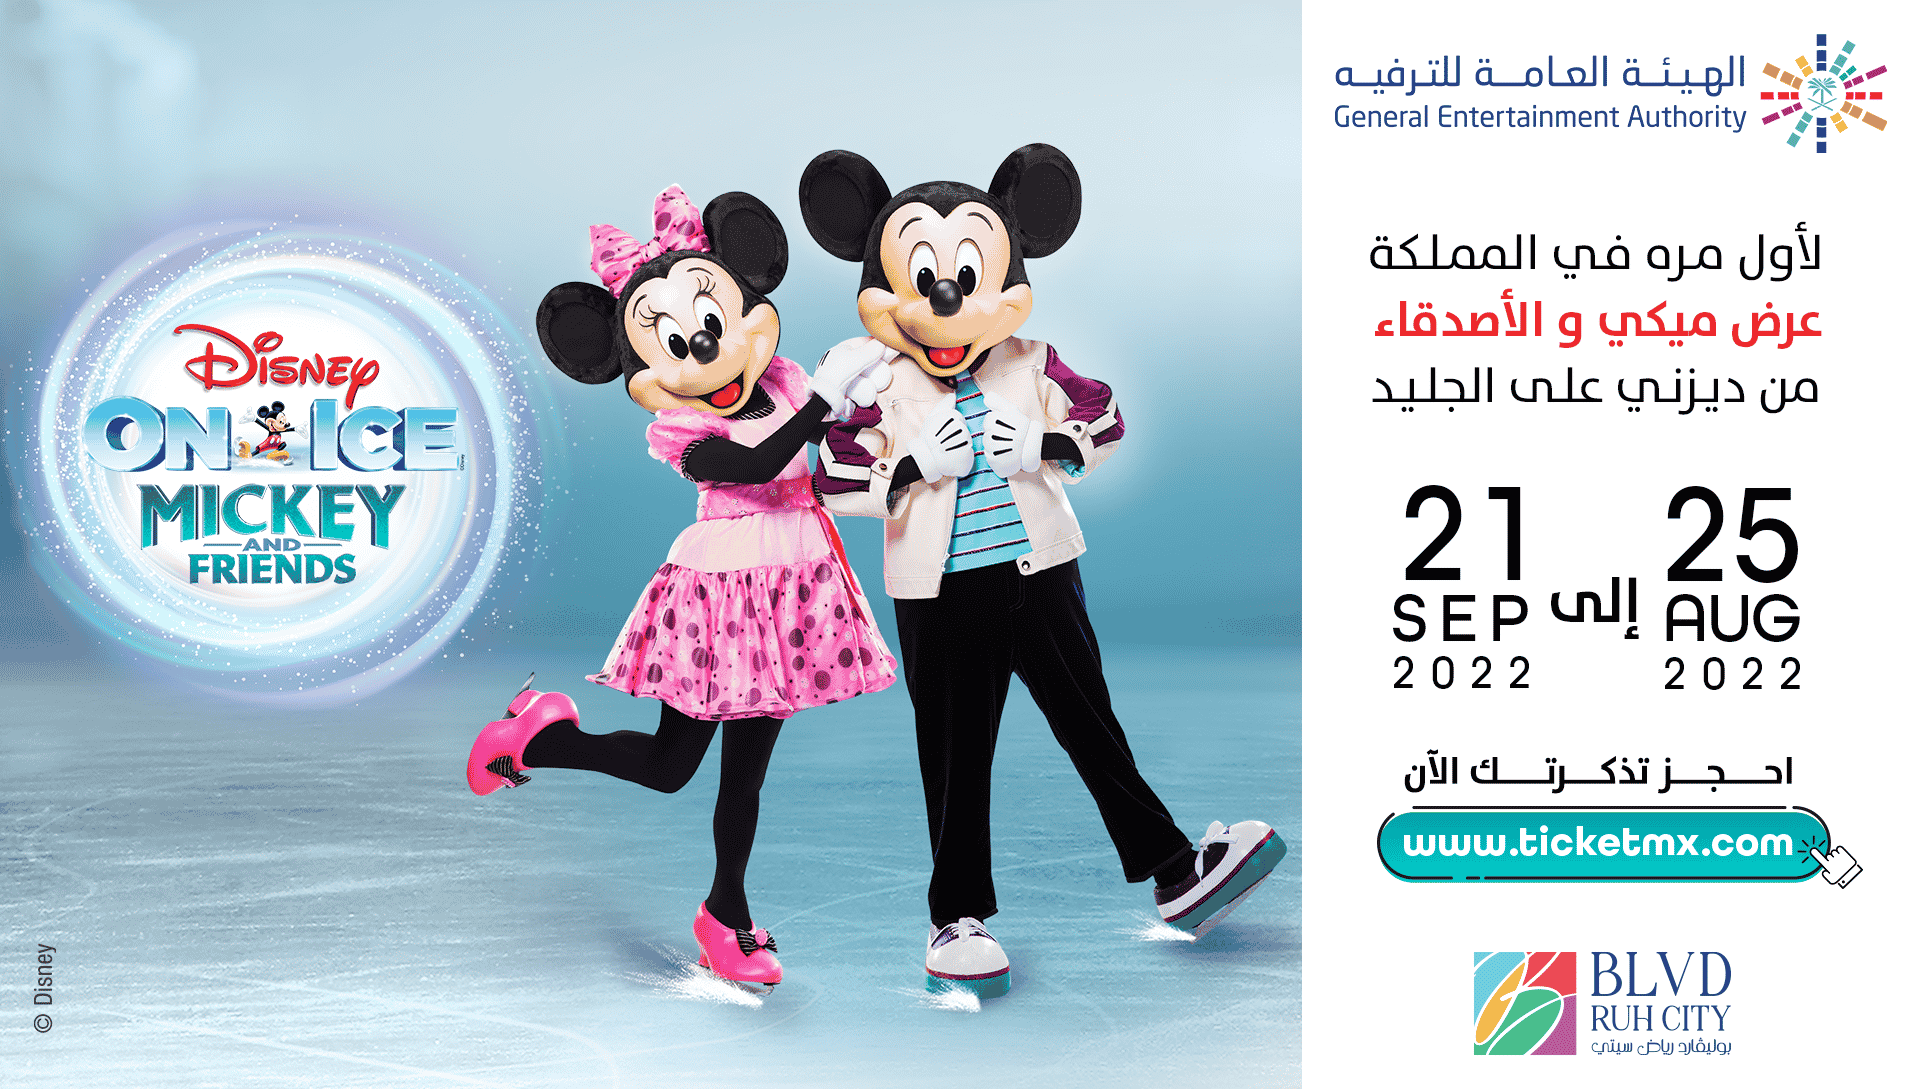 “Disney On Ice presents Mickey and Friends” takes fans on the ultimate journey down memory lane in Riyadh